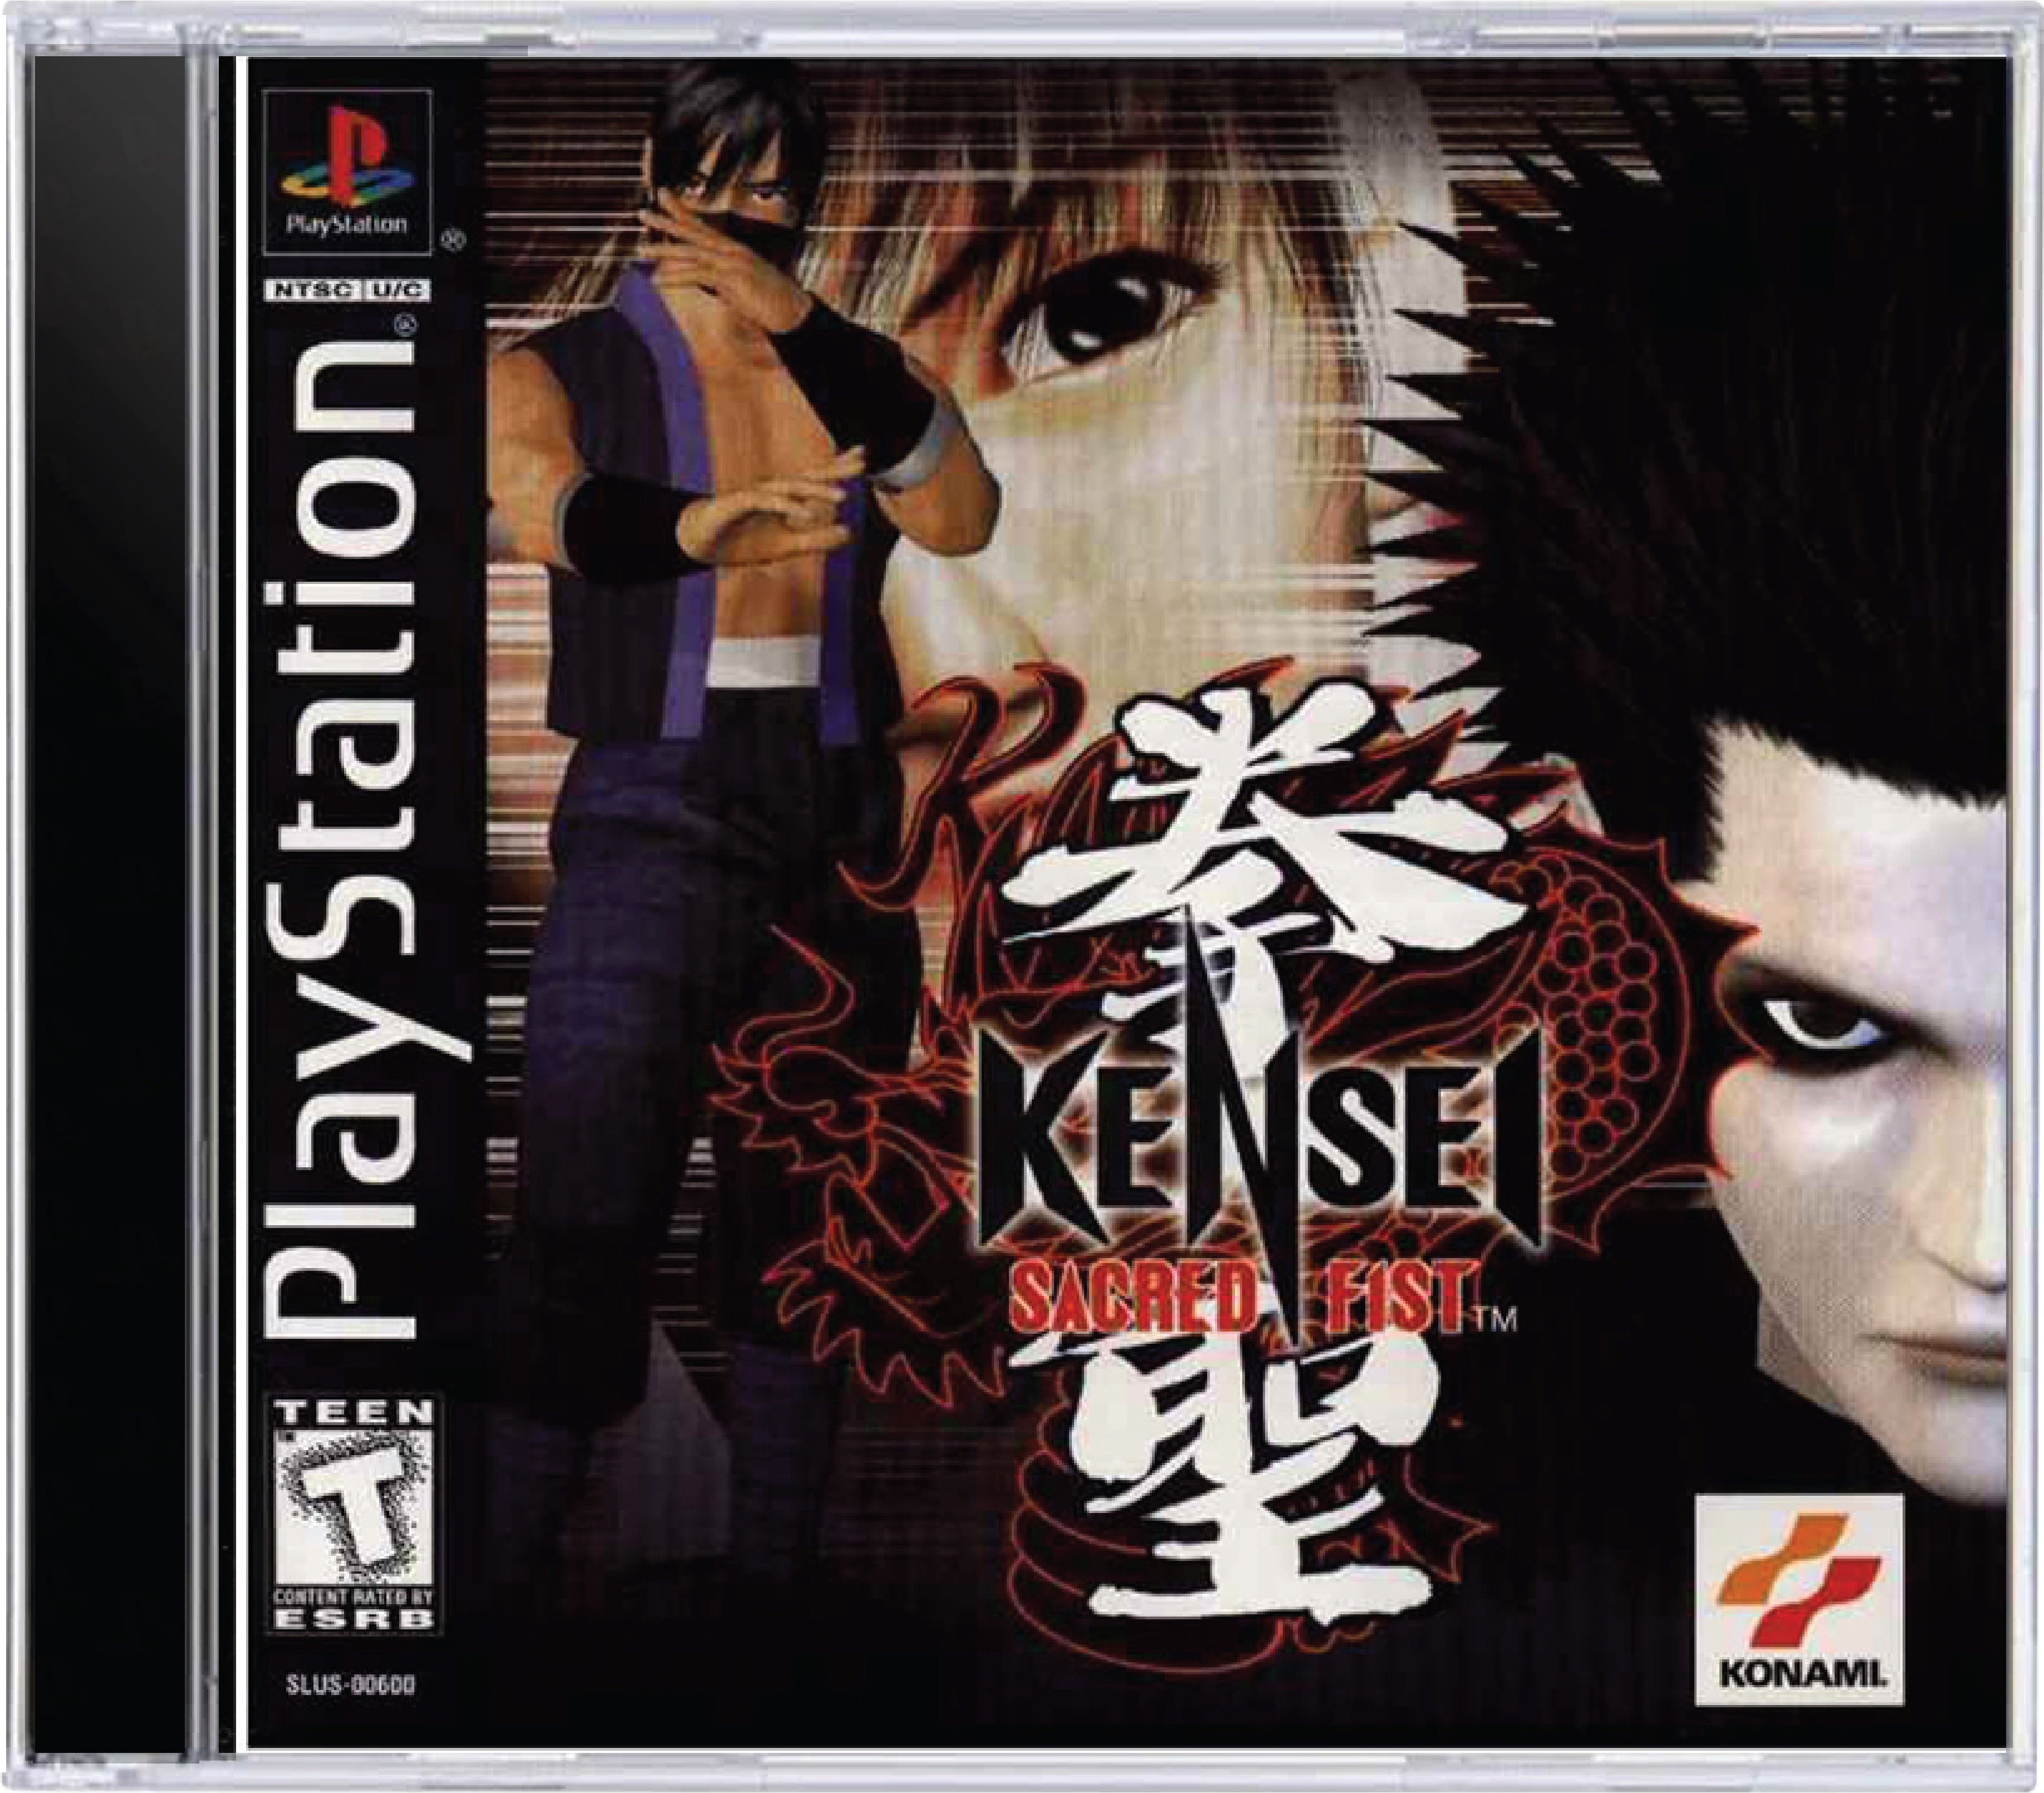 Kensei Sacred Fist Cover Art and Product Photo